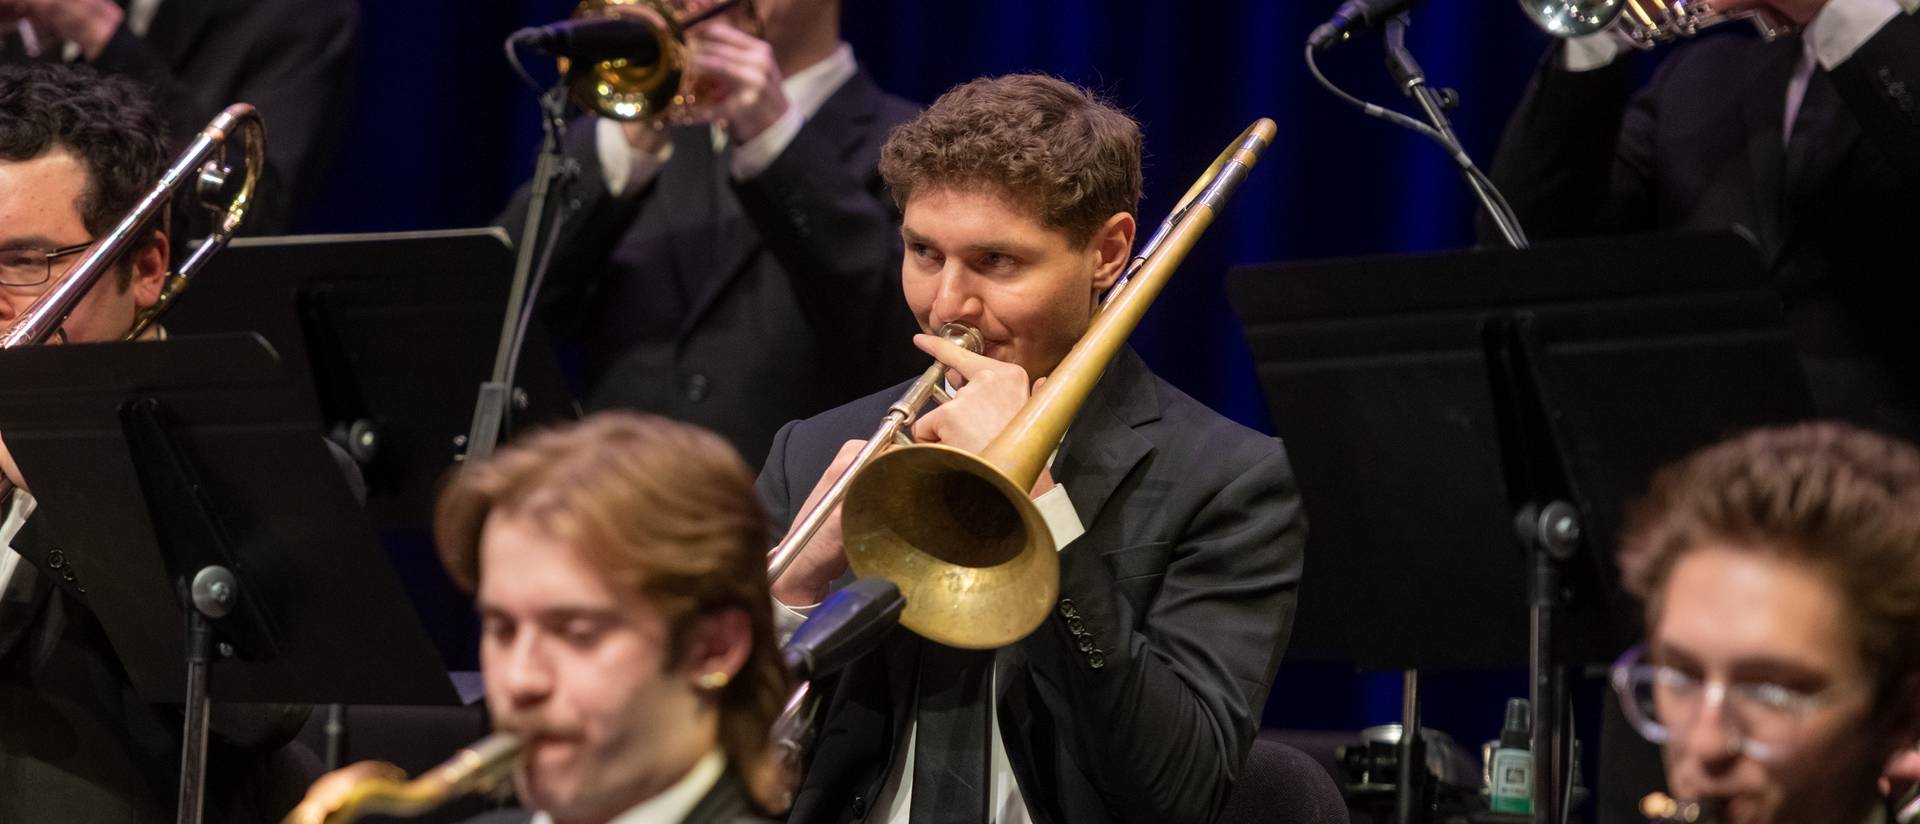 Male trombone player featured among band members